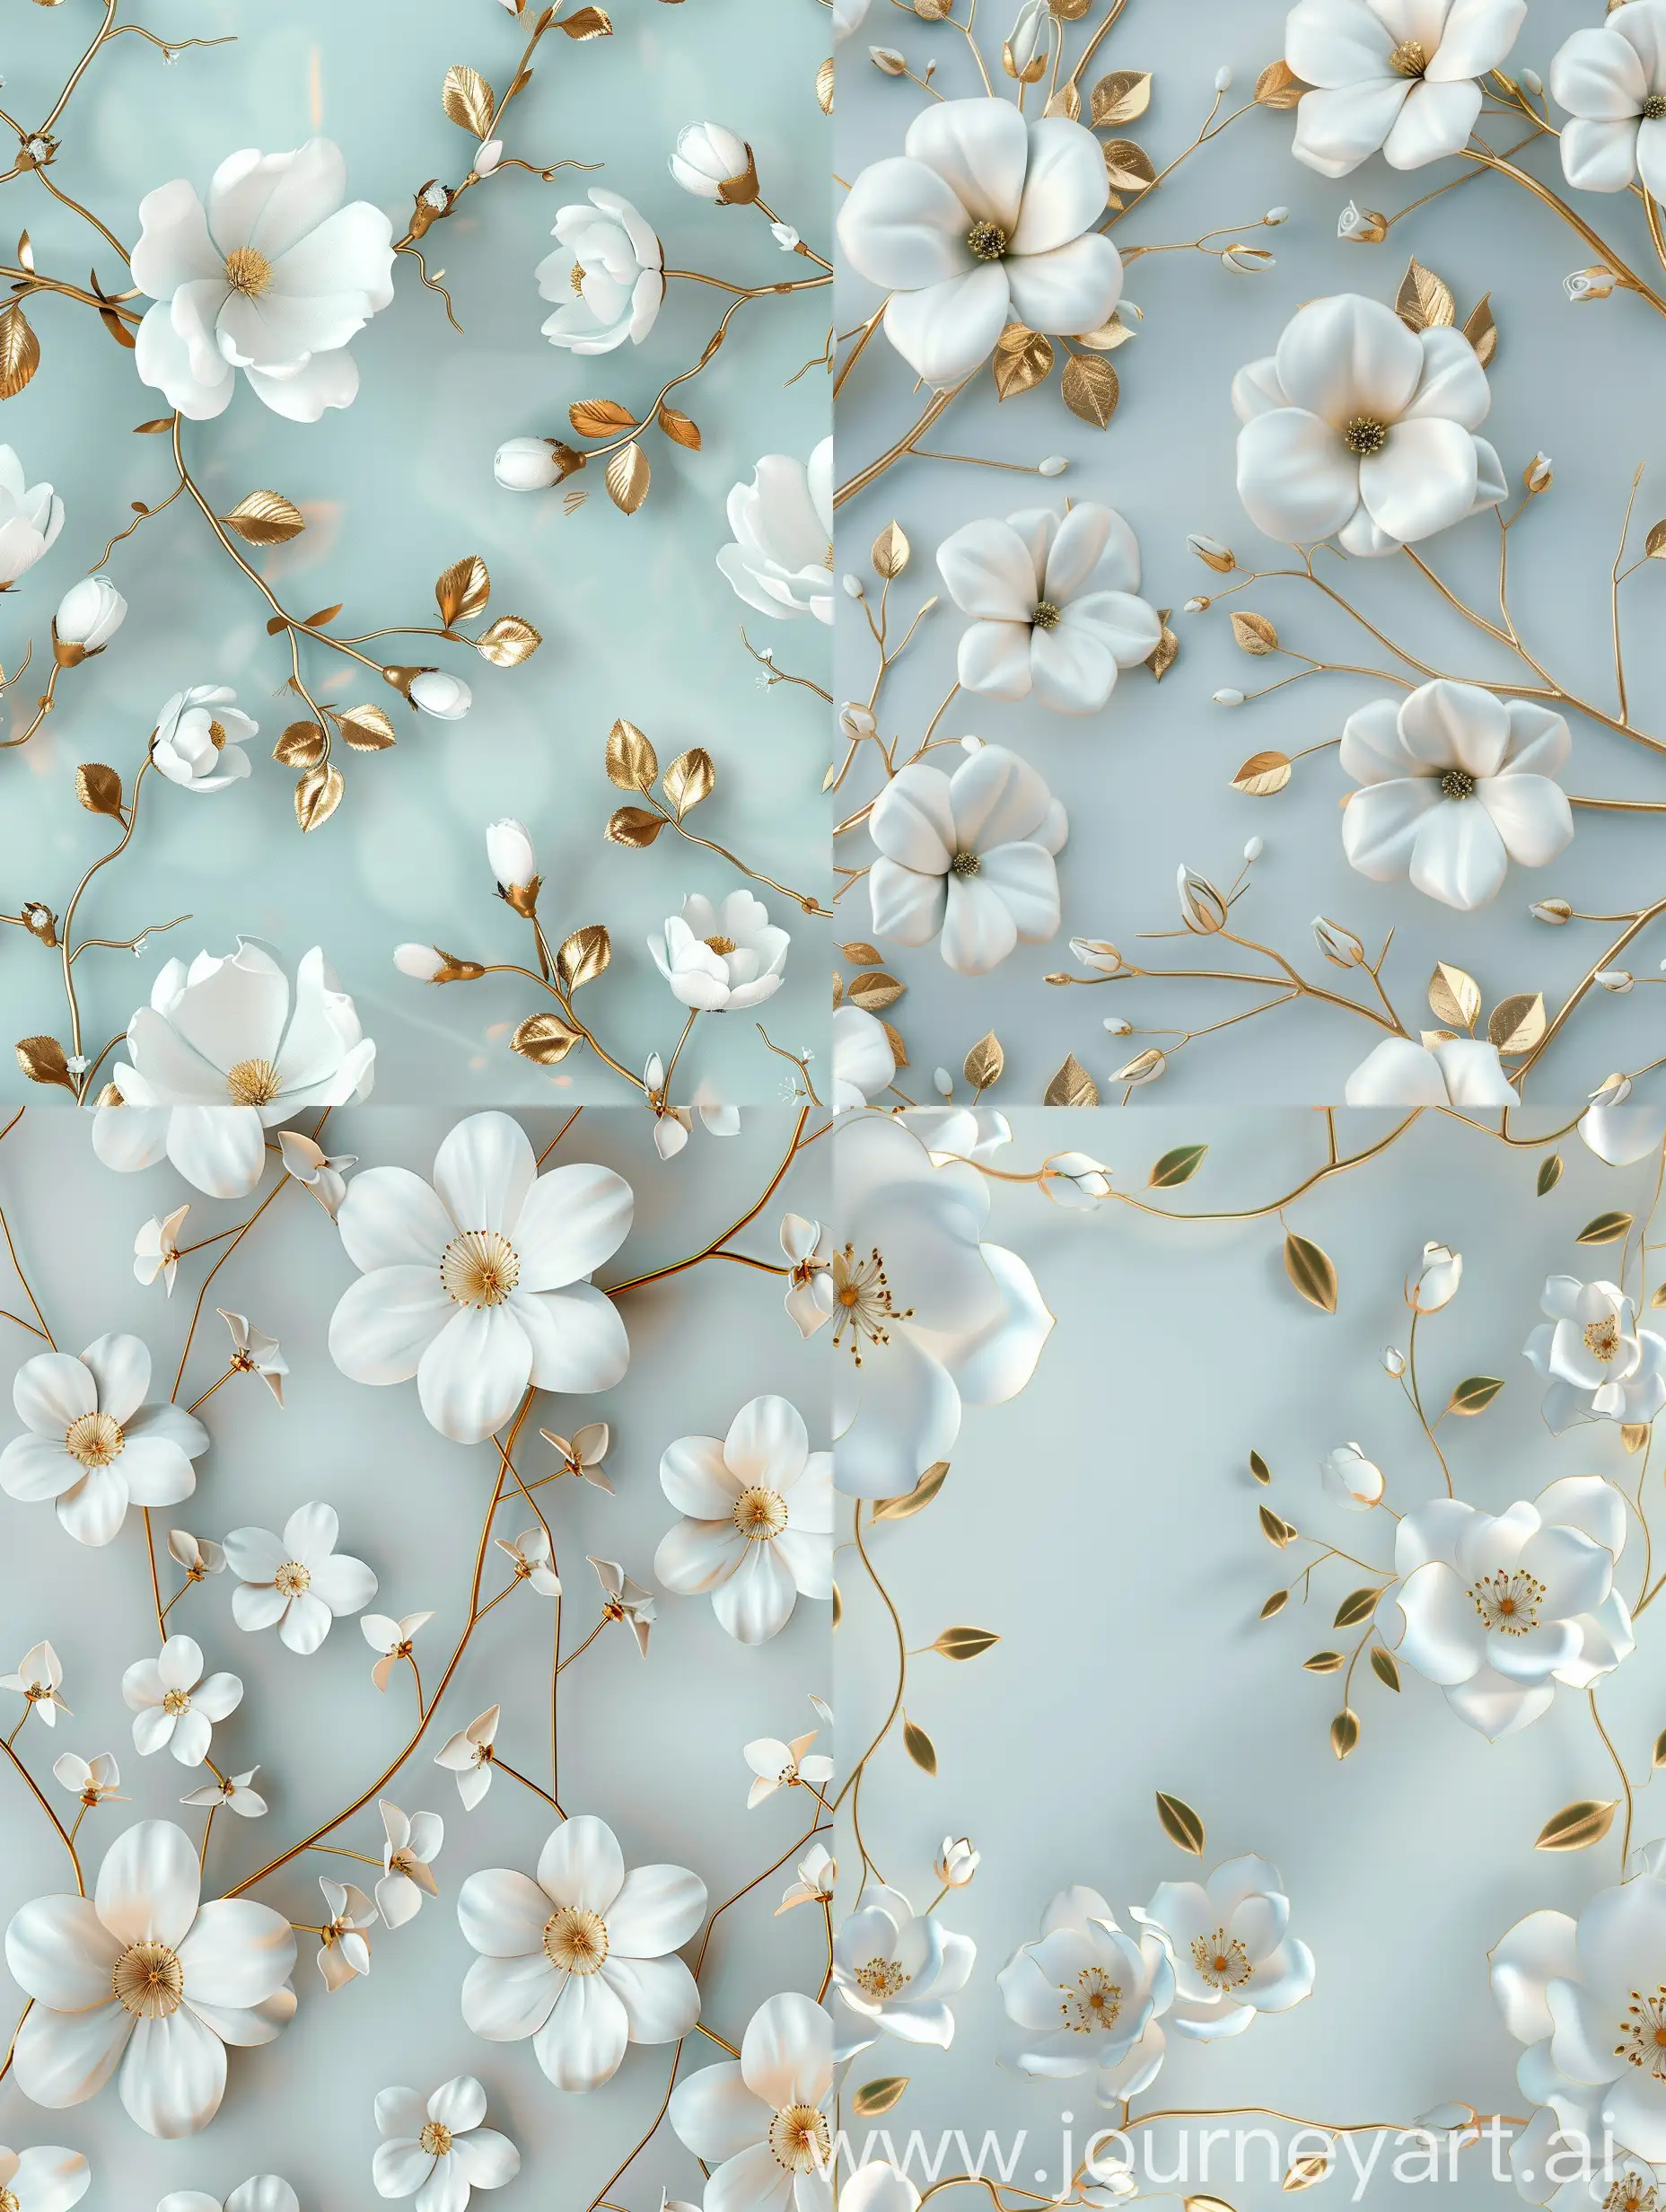  3d seamless pattern, elegant white flowers with golden branches and leaves, lovely pastel background in light blue color, minimalistic style, luxurious wall paper design, high resolution  